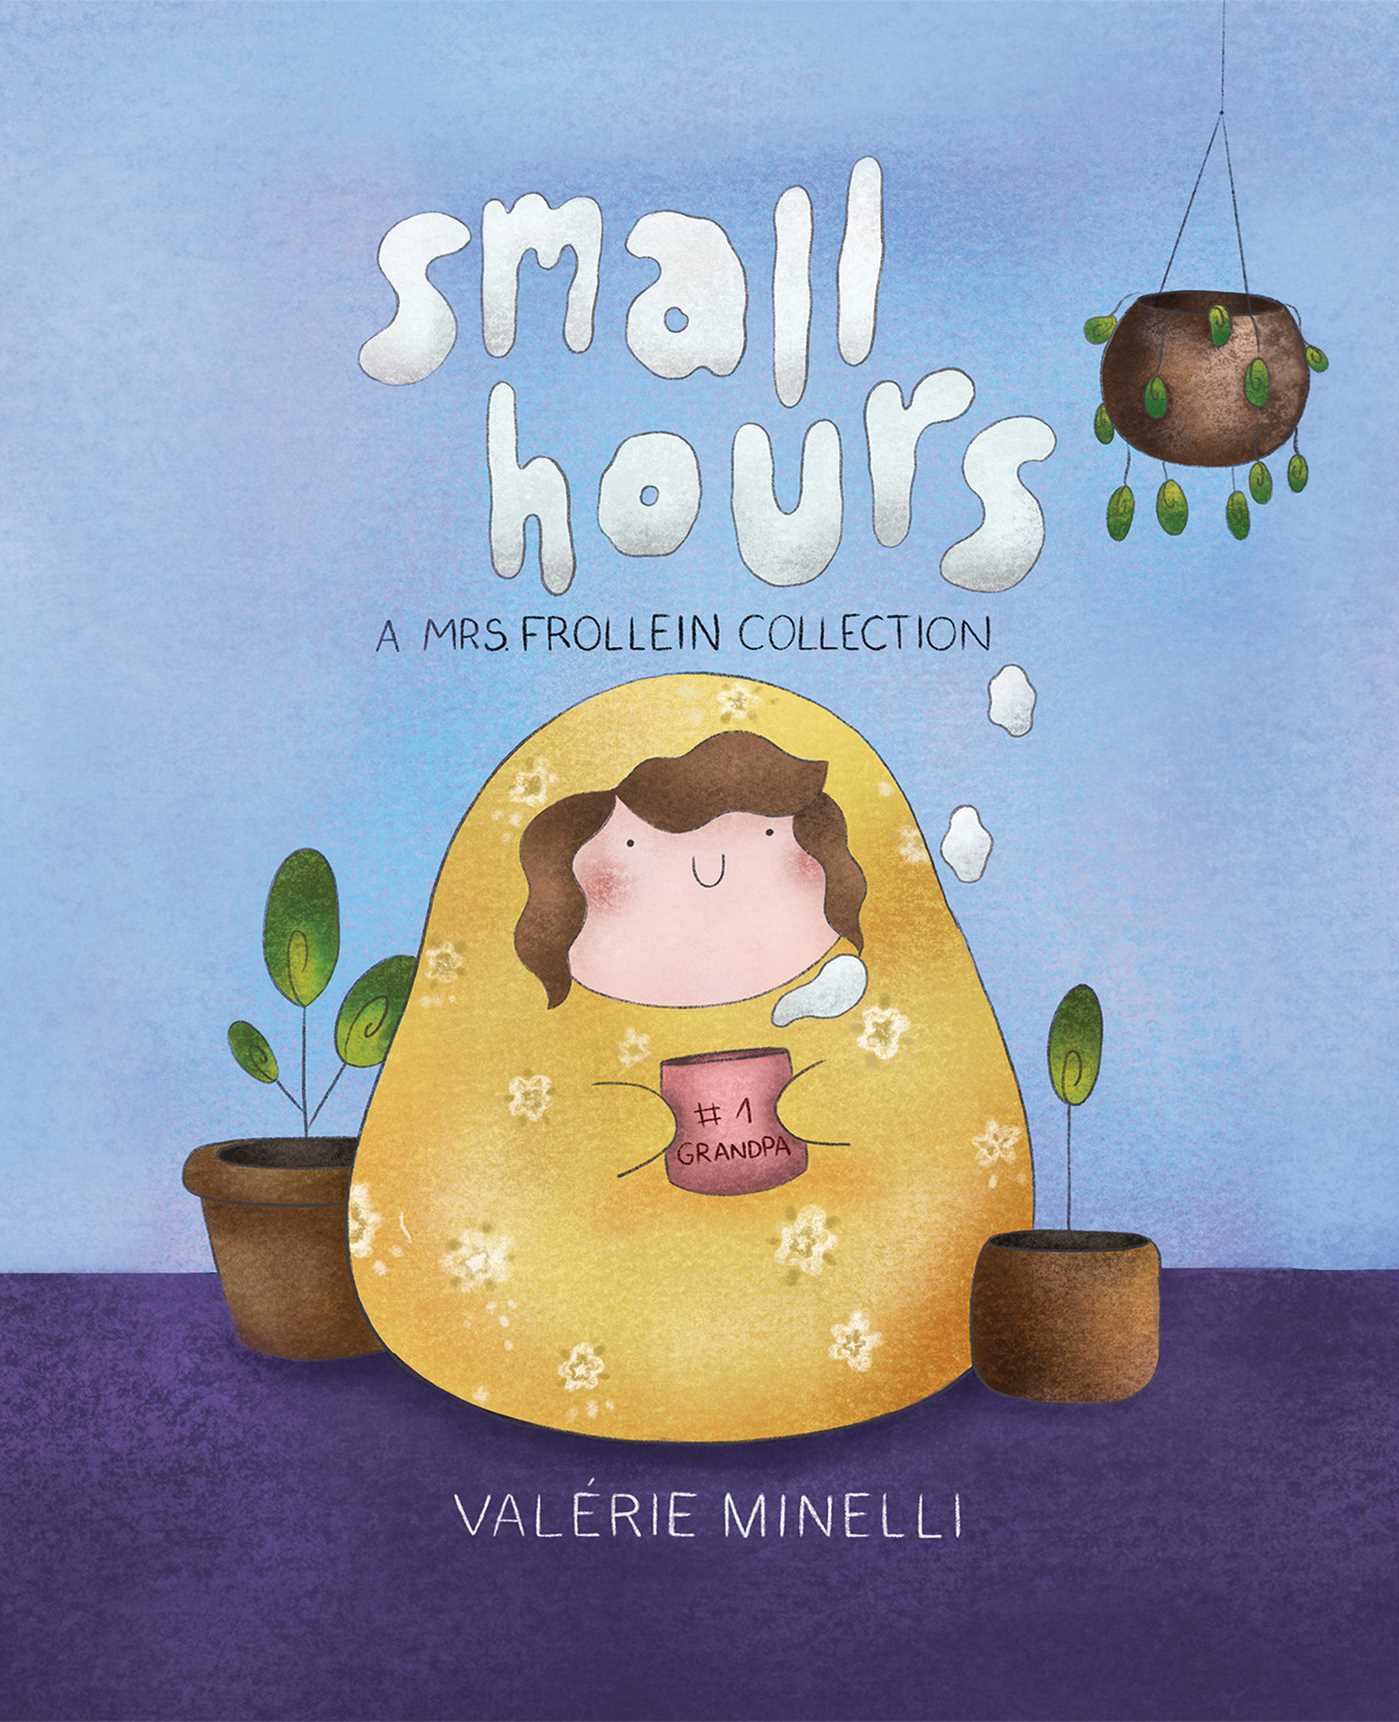 The Mrs. Frollein Collection: Small Hours